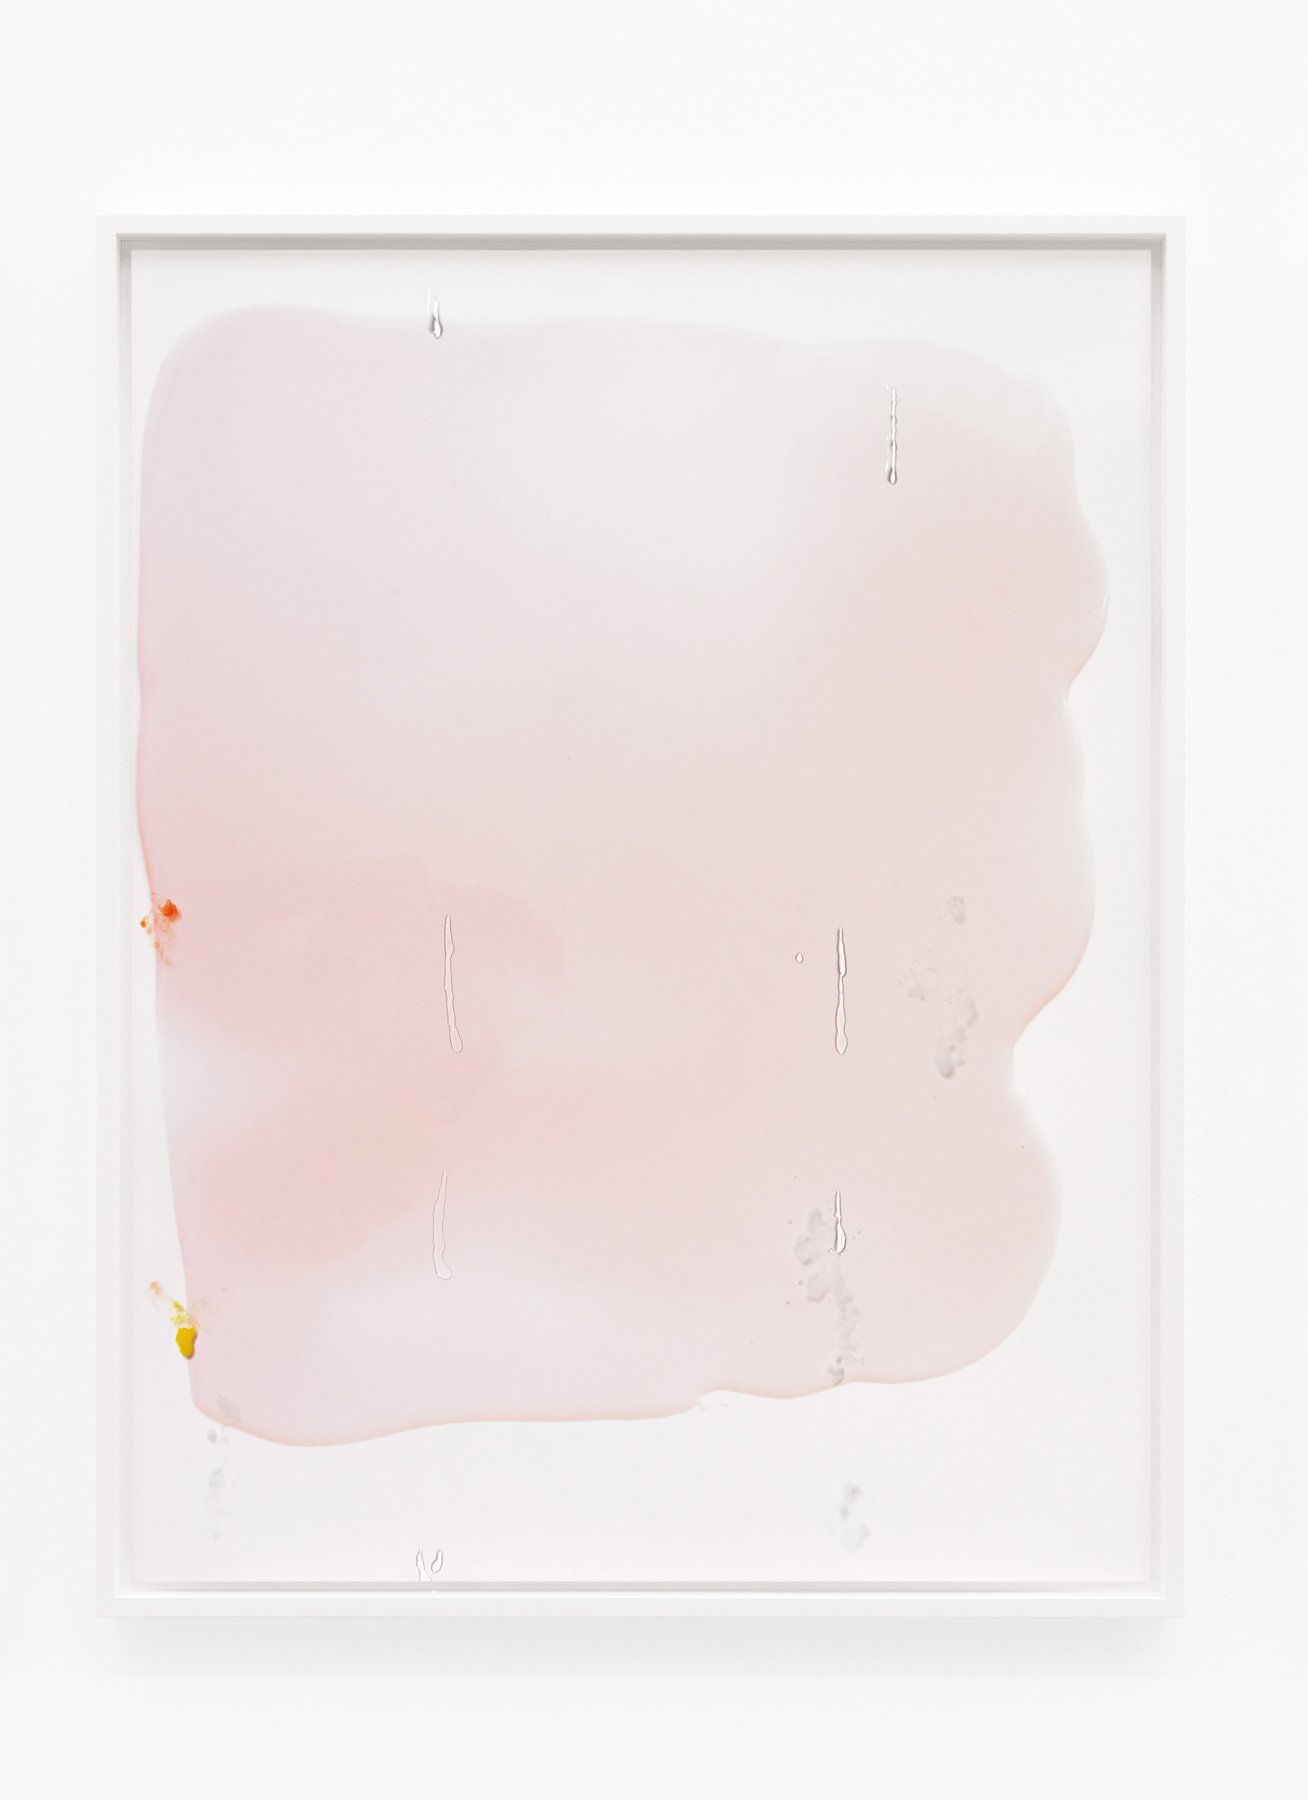 Lisa HolzerThe Party Sequel (Berlin), 2017Pigment print on cotton paper, crystal clear 202/1 polyurethane and acrylic paint on glass110.3 × 86.3 cm